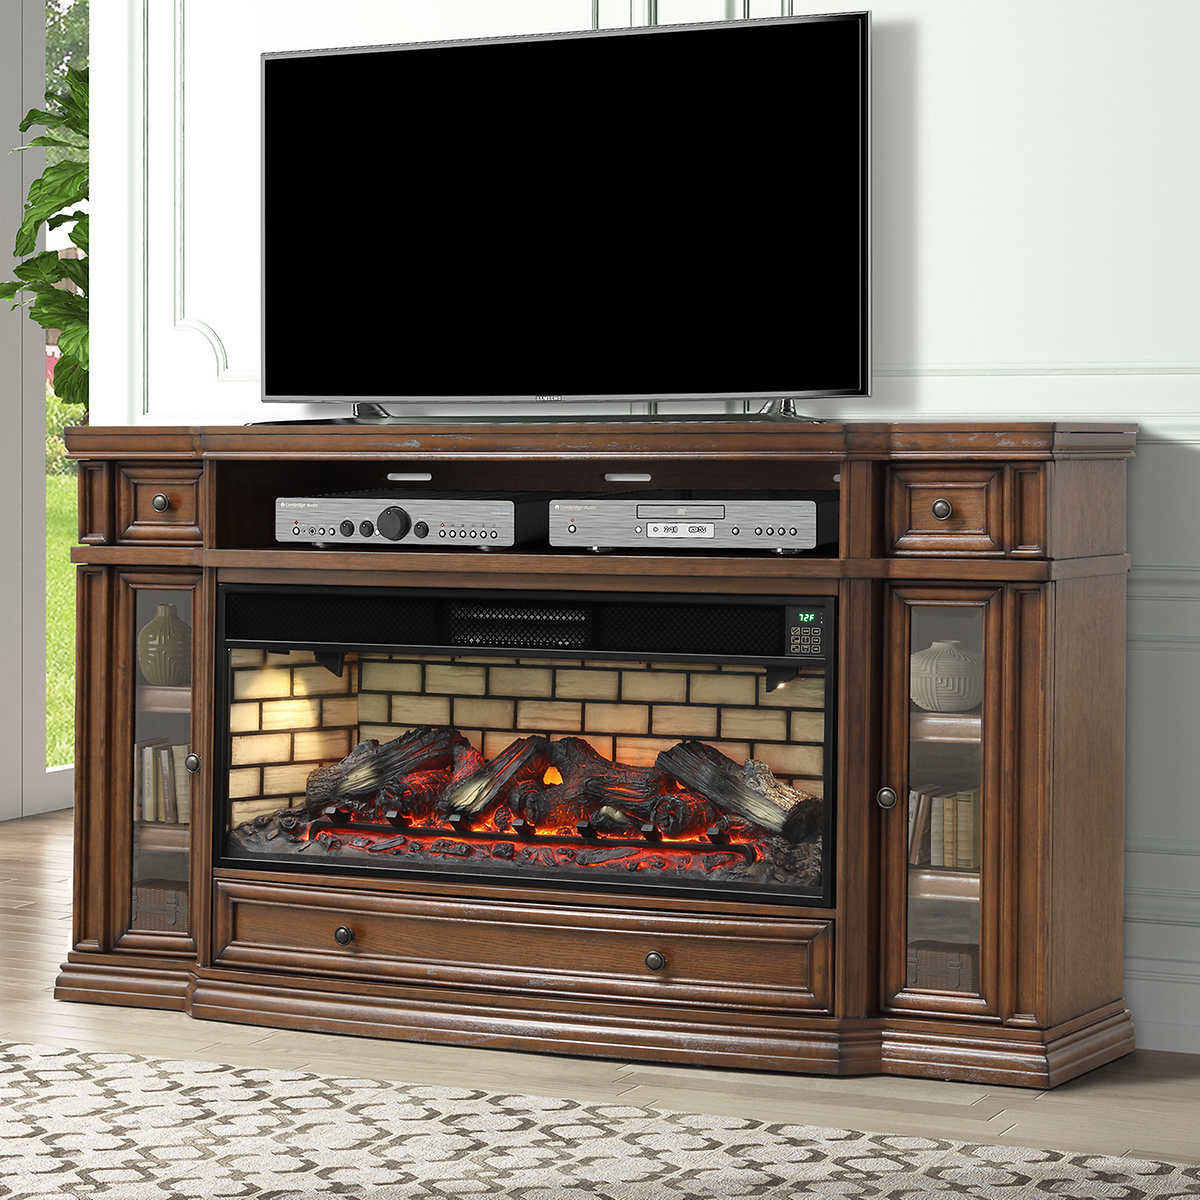 Klamath 75 Media Fireplace Costco, Media Consoles With Fireplace Inserts